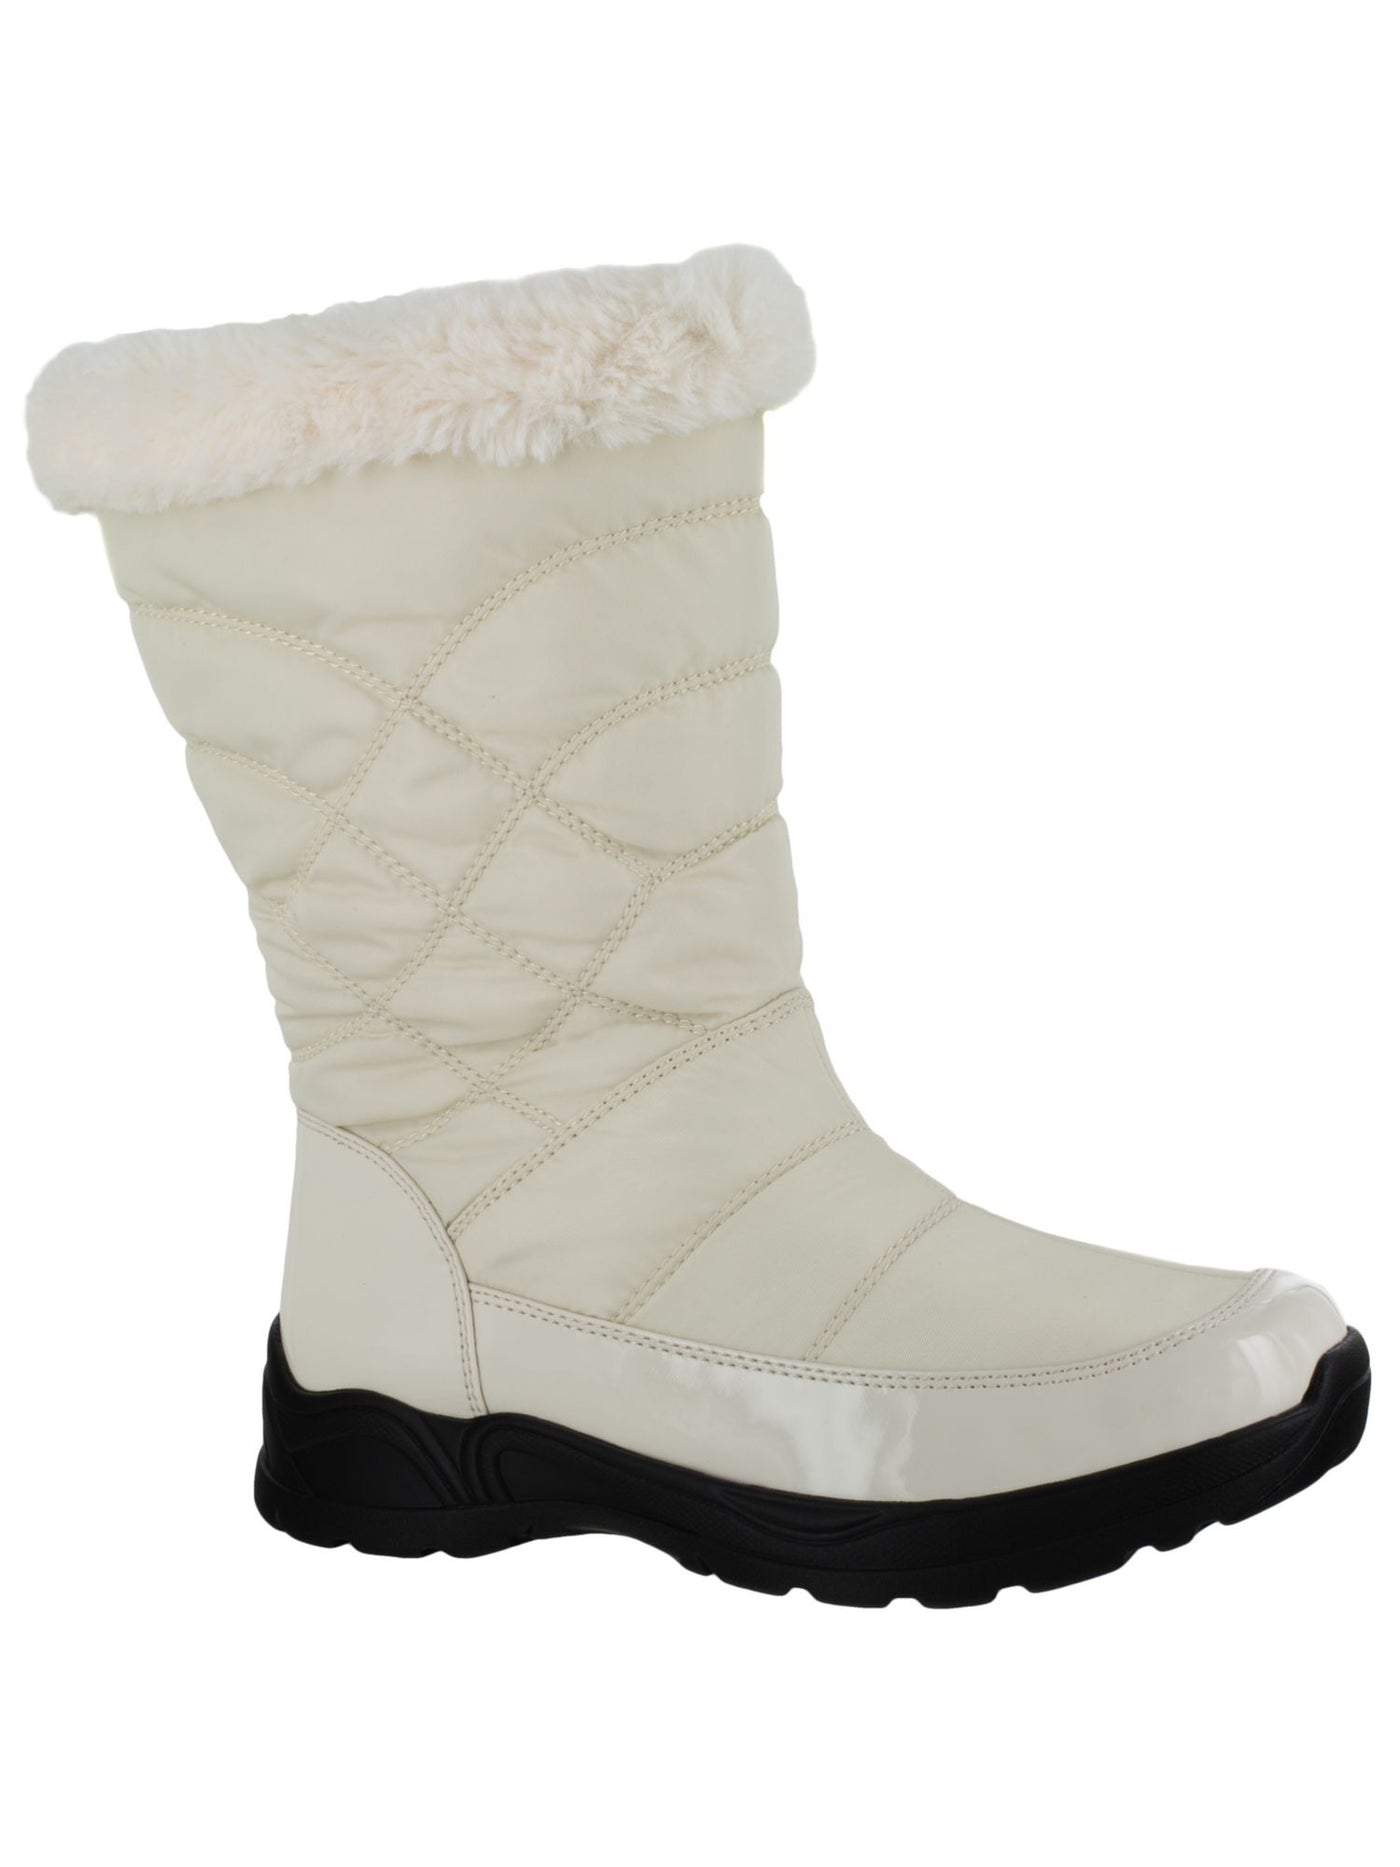 EASY DRY Womens White Quilted Gusseted Zipper Comfort Waterproof Cuddle Round Toe Zip-Up Snow Boots 10 W